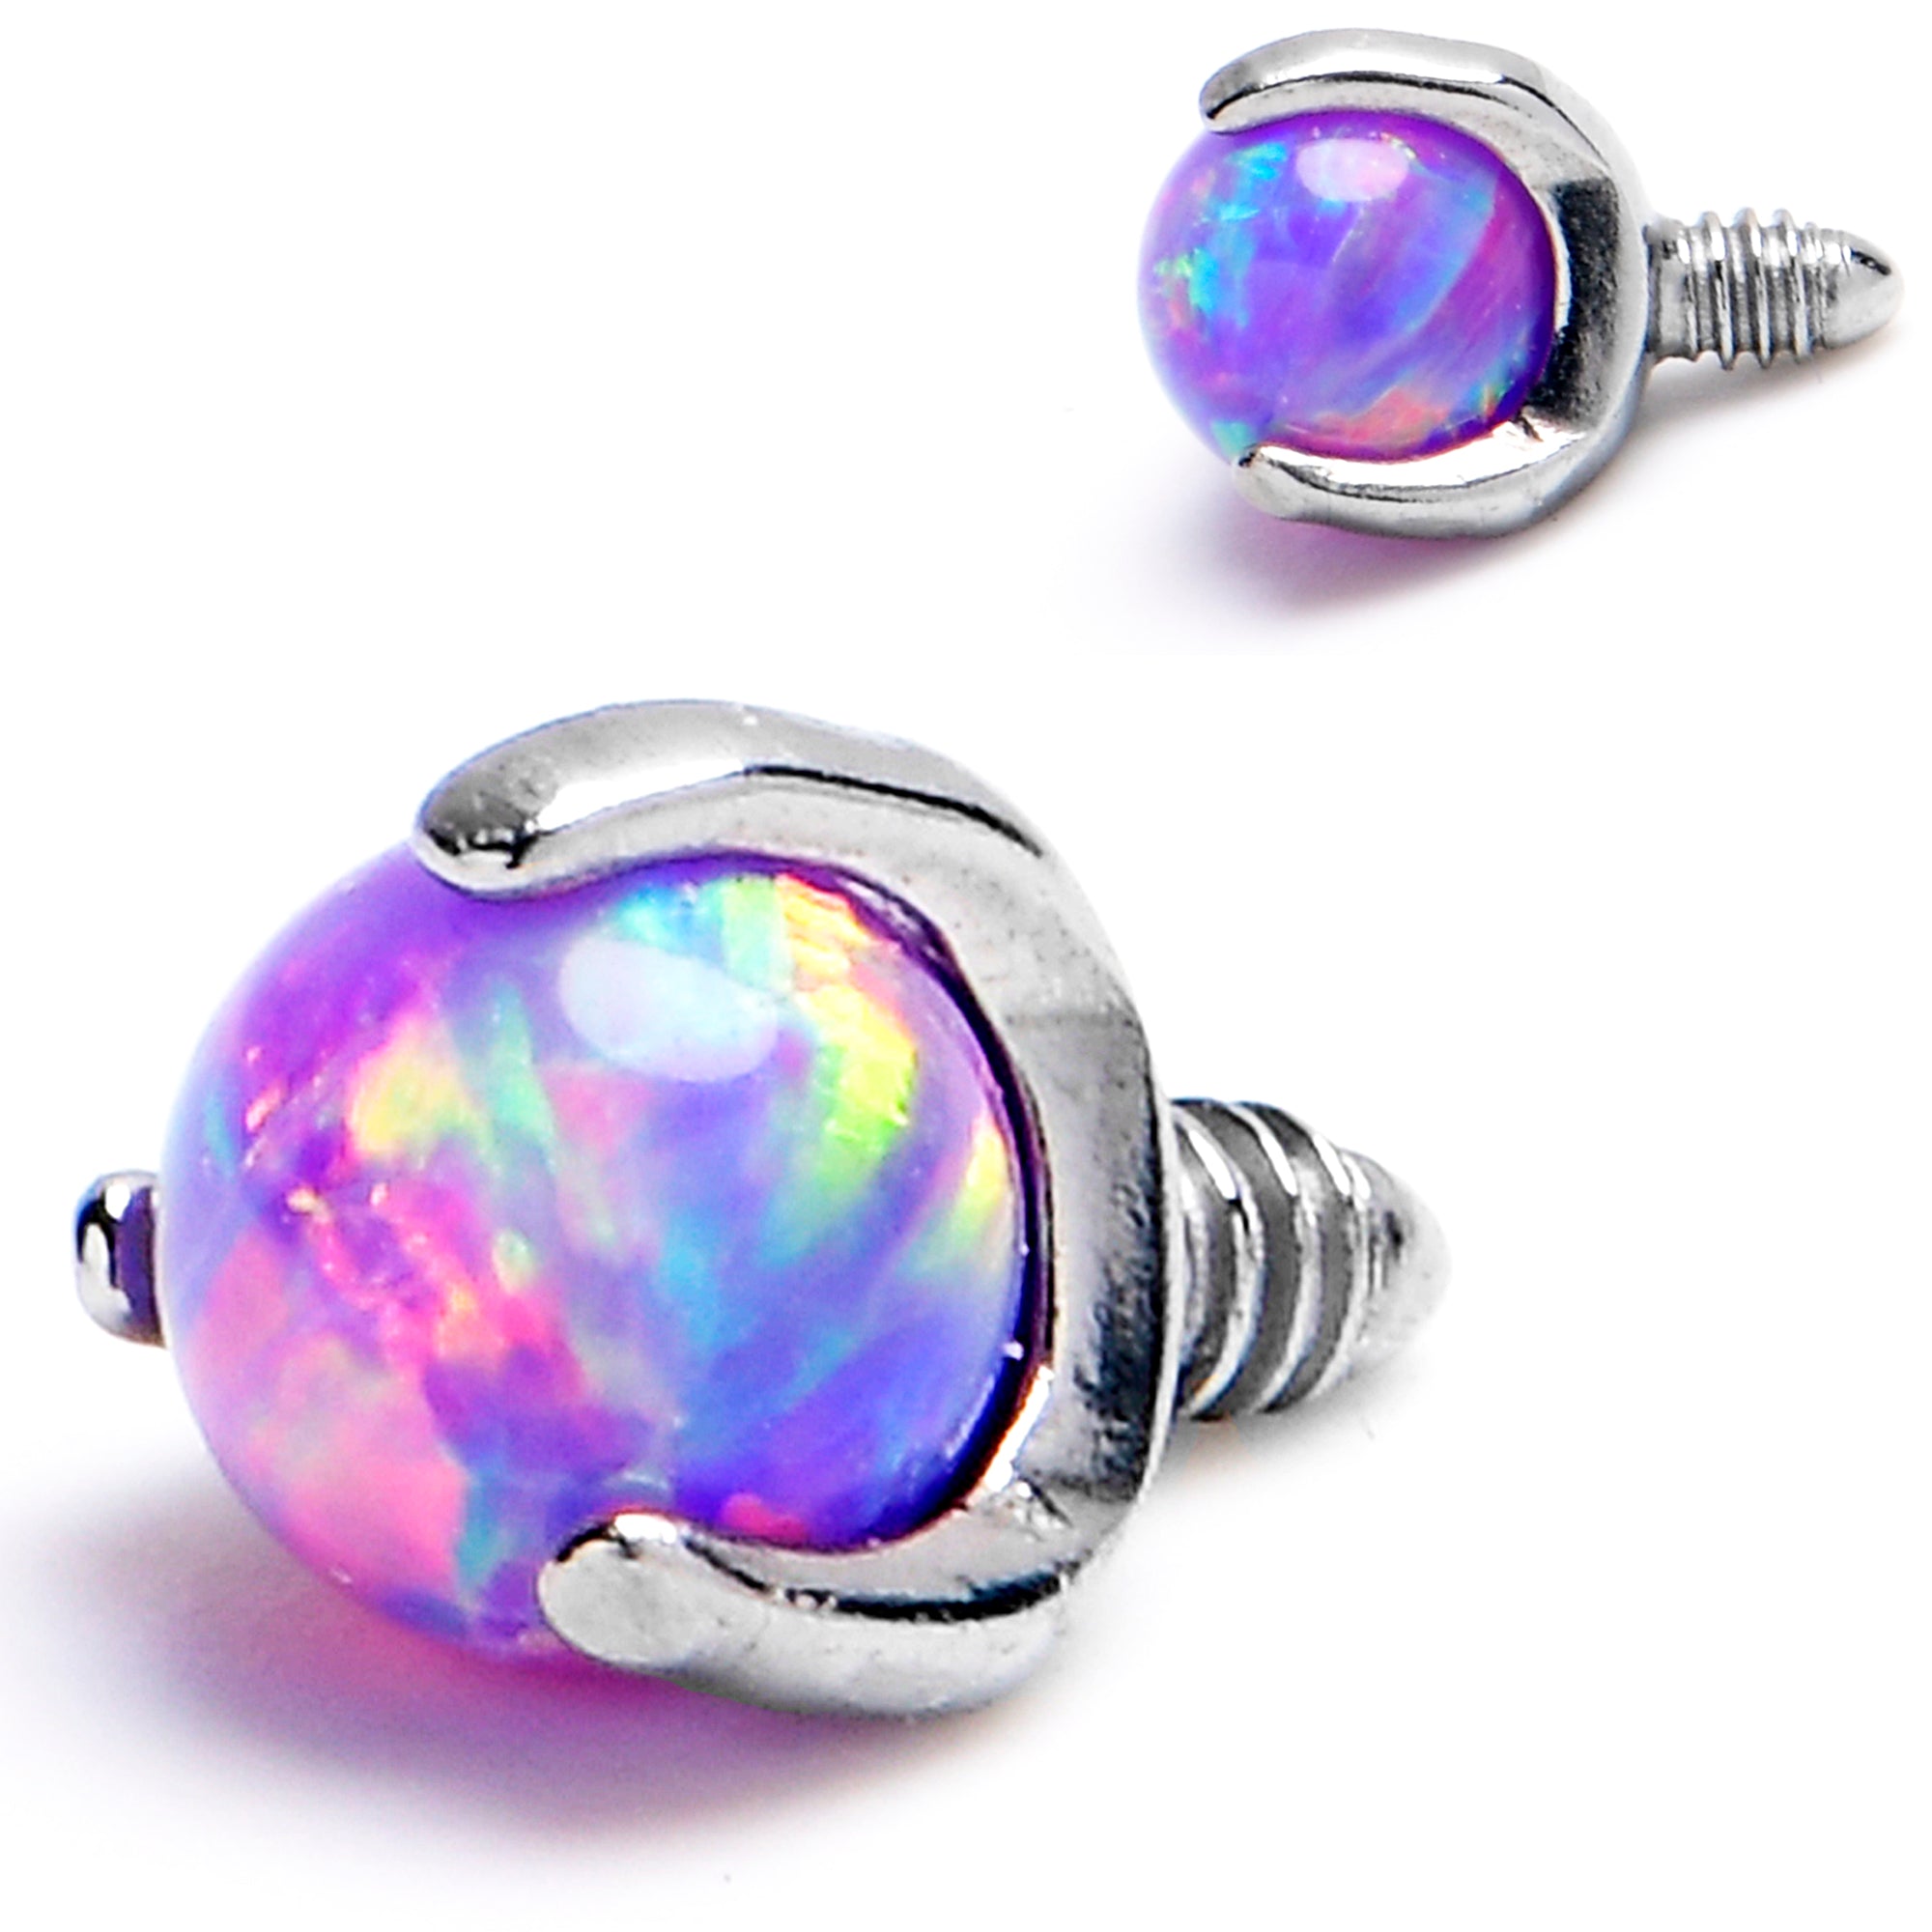 14 Gauge 3mm Purple Synthetic Opal Internally Threaded Replacement Ball